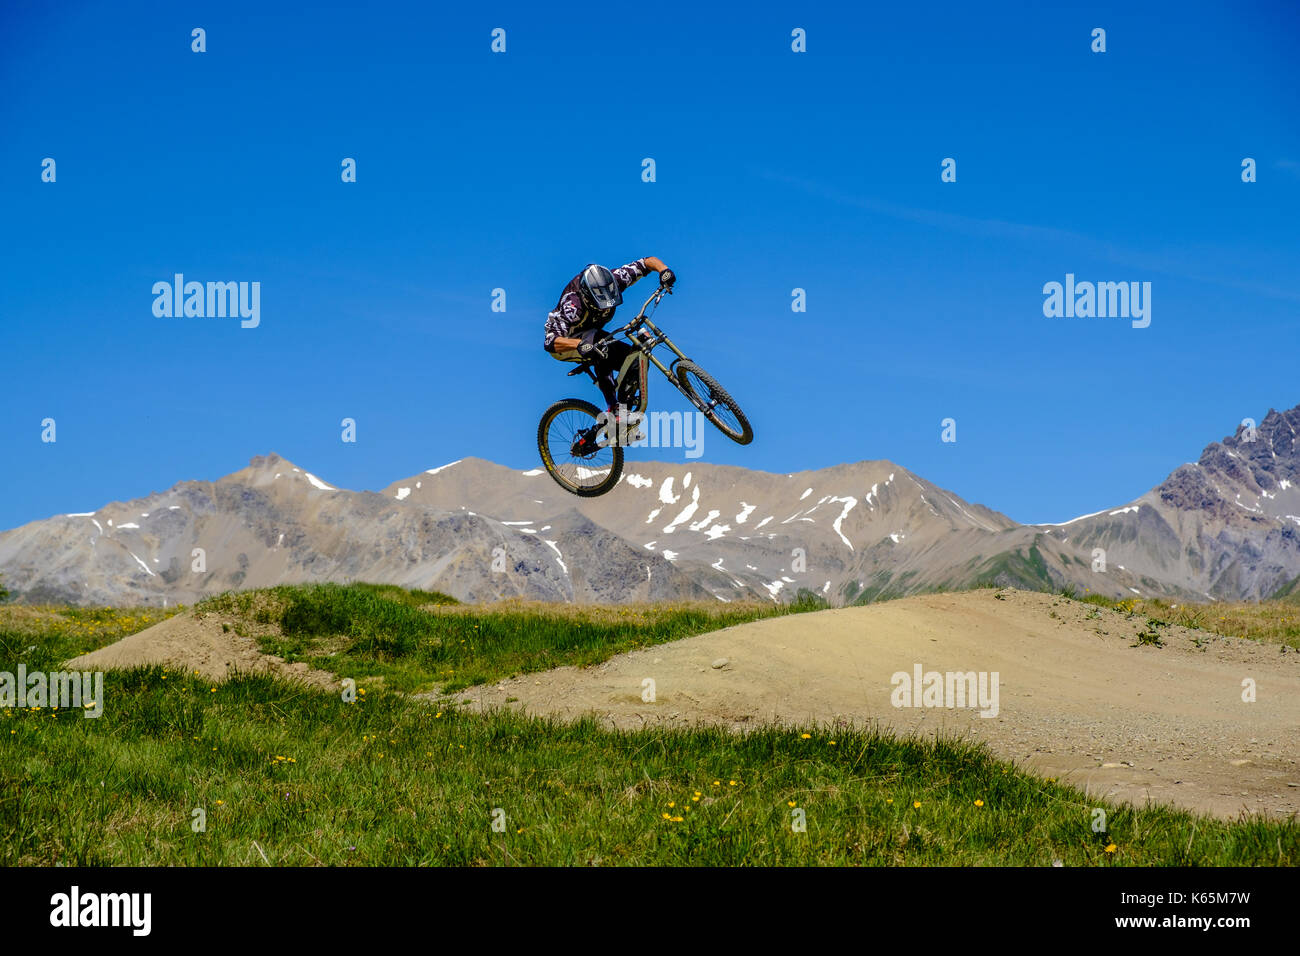 Downhill cyclist in action jumping in the Motolino Bike Park Stock Photo